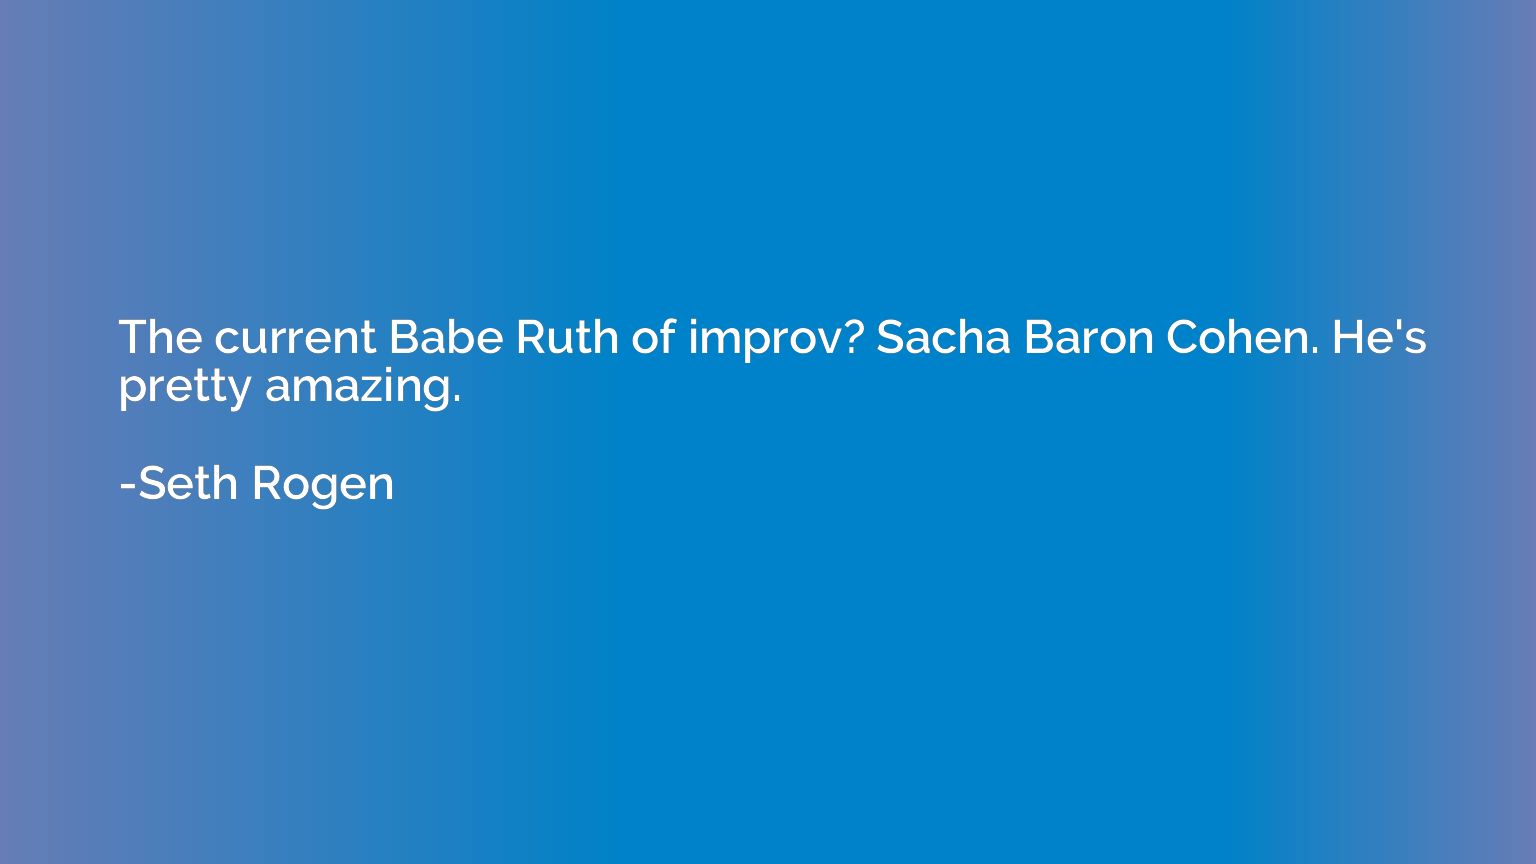 The current Babe Ruth of improv? Sacha Baron Cohen. He's pre